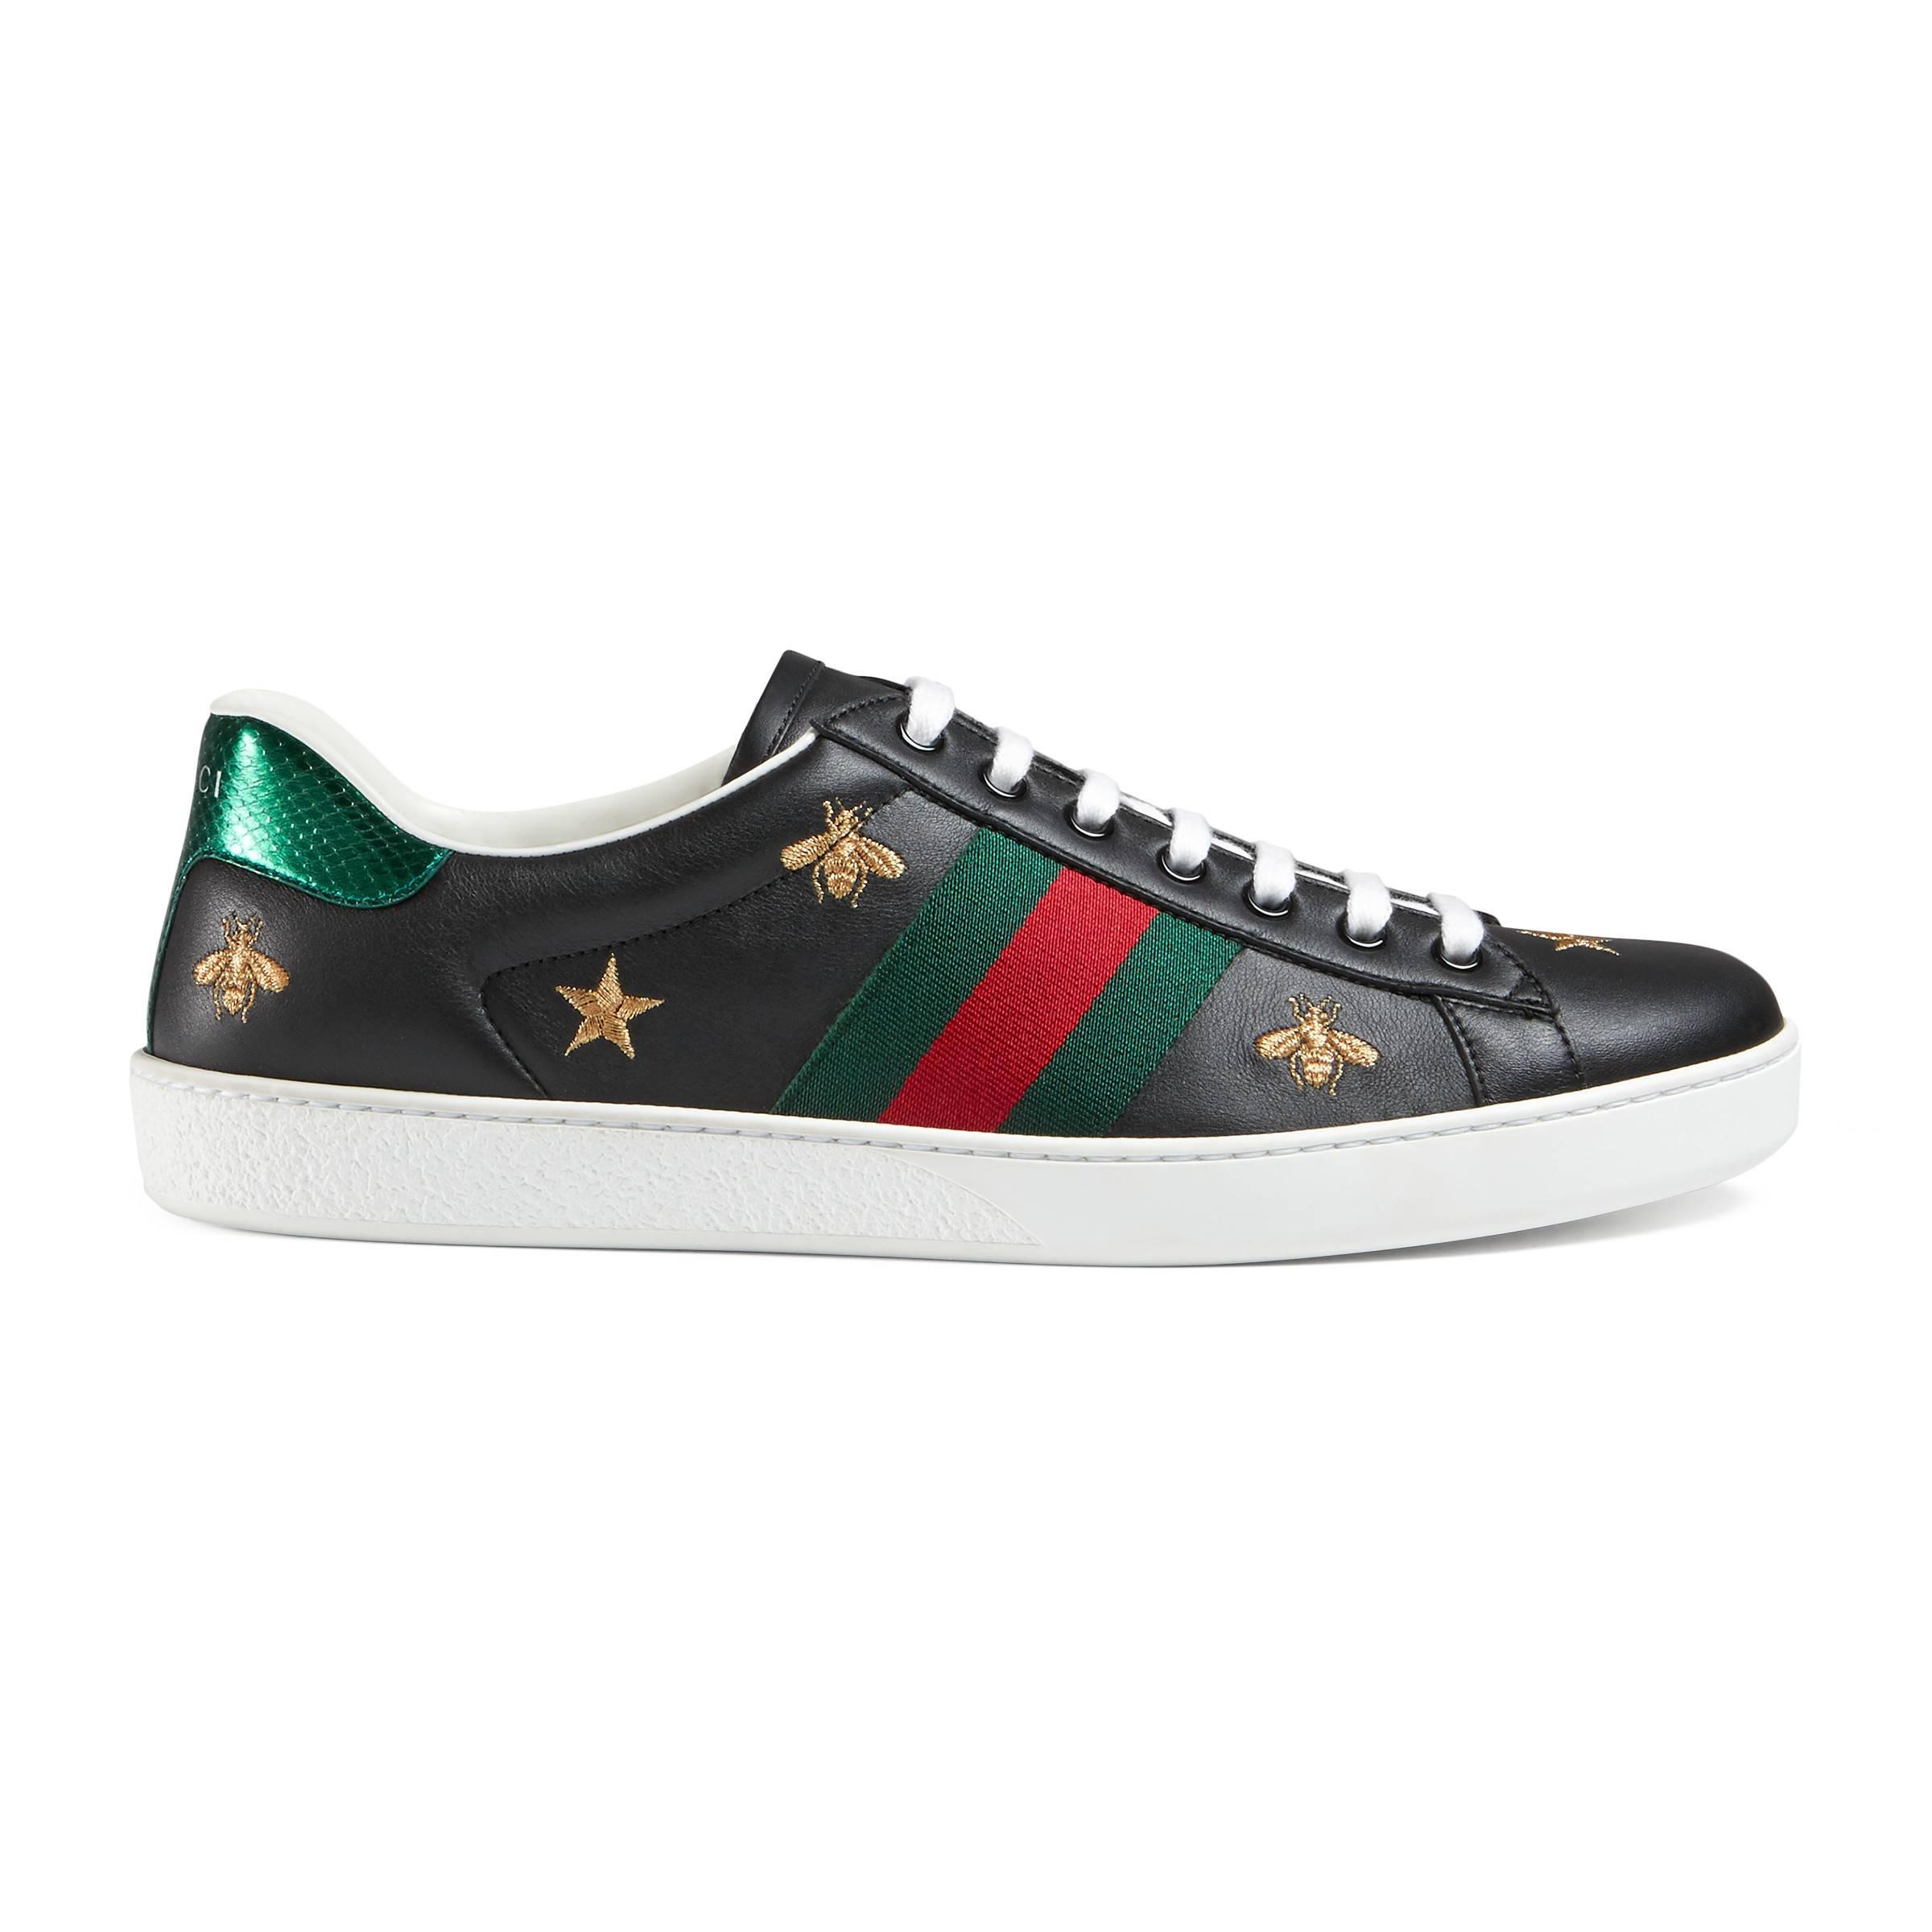 Gucci Leather Ace Embroidered Sneaker in Men - Lyst